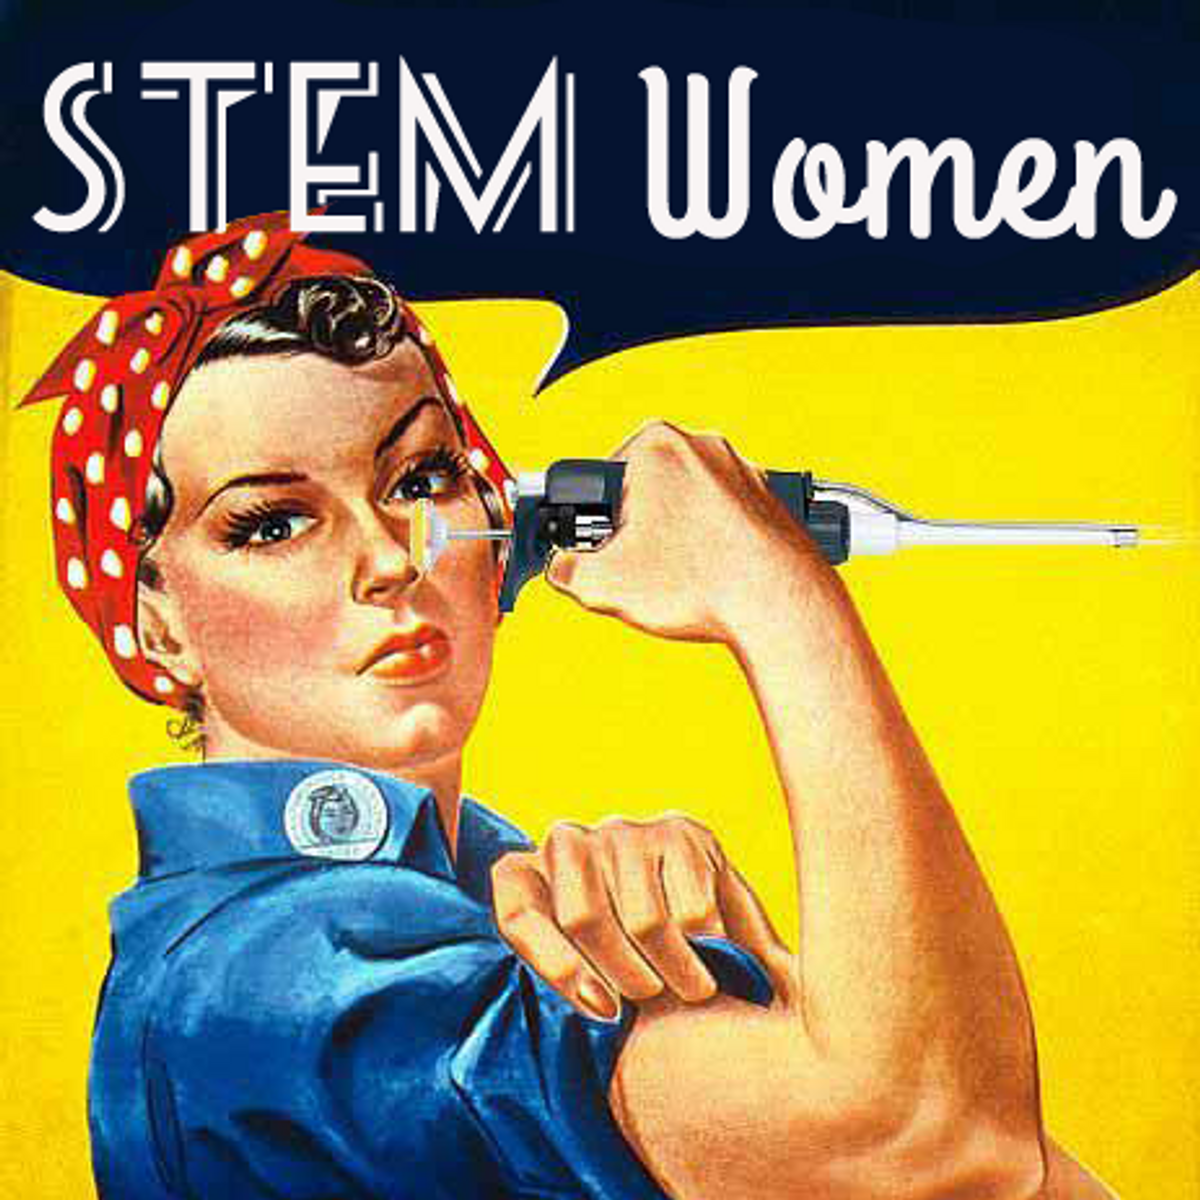 Where Are All The Women In STEM?